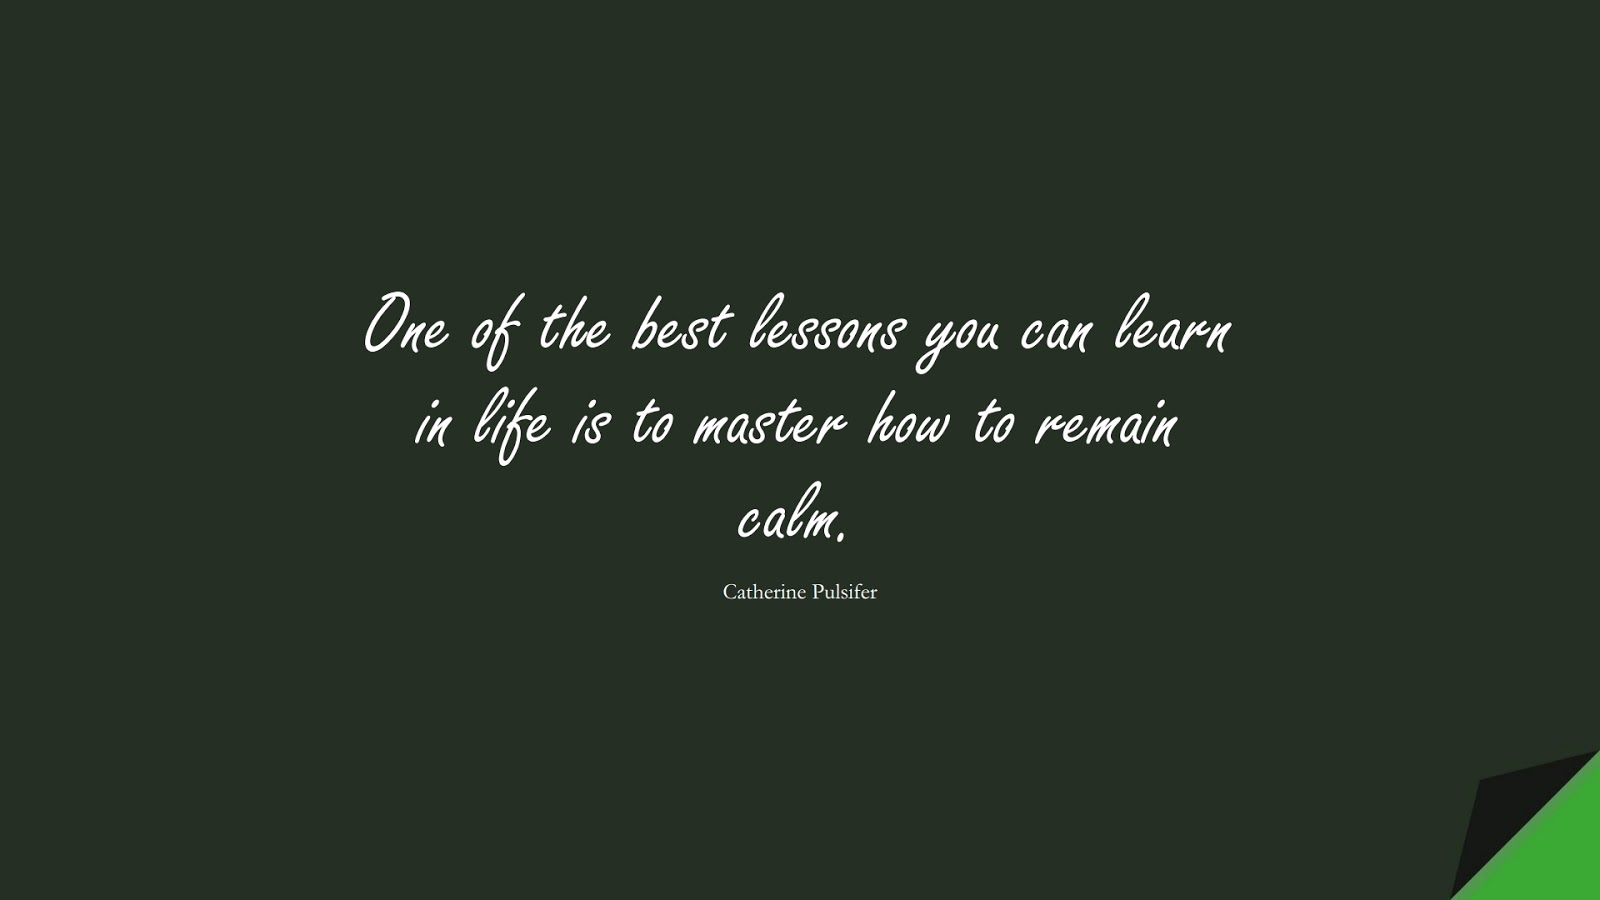 One of the best lessons you can learn in life is to master how to remain calm. (Catherine Pulsifer);  #CalmQuotes